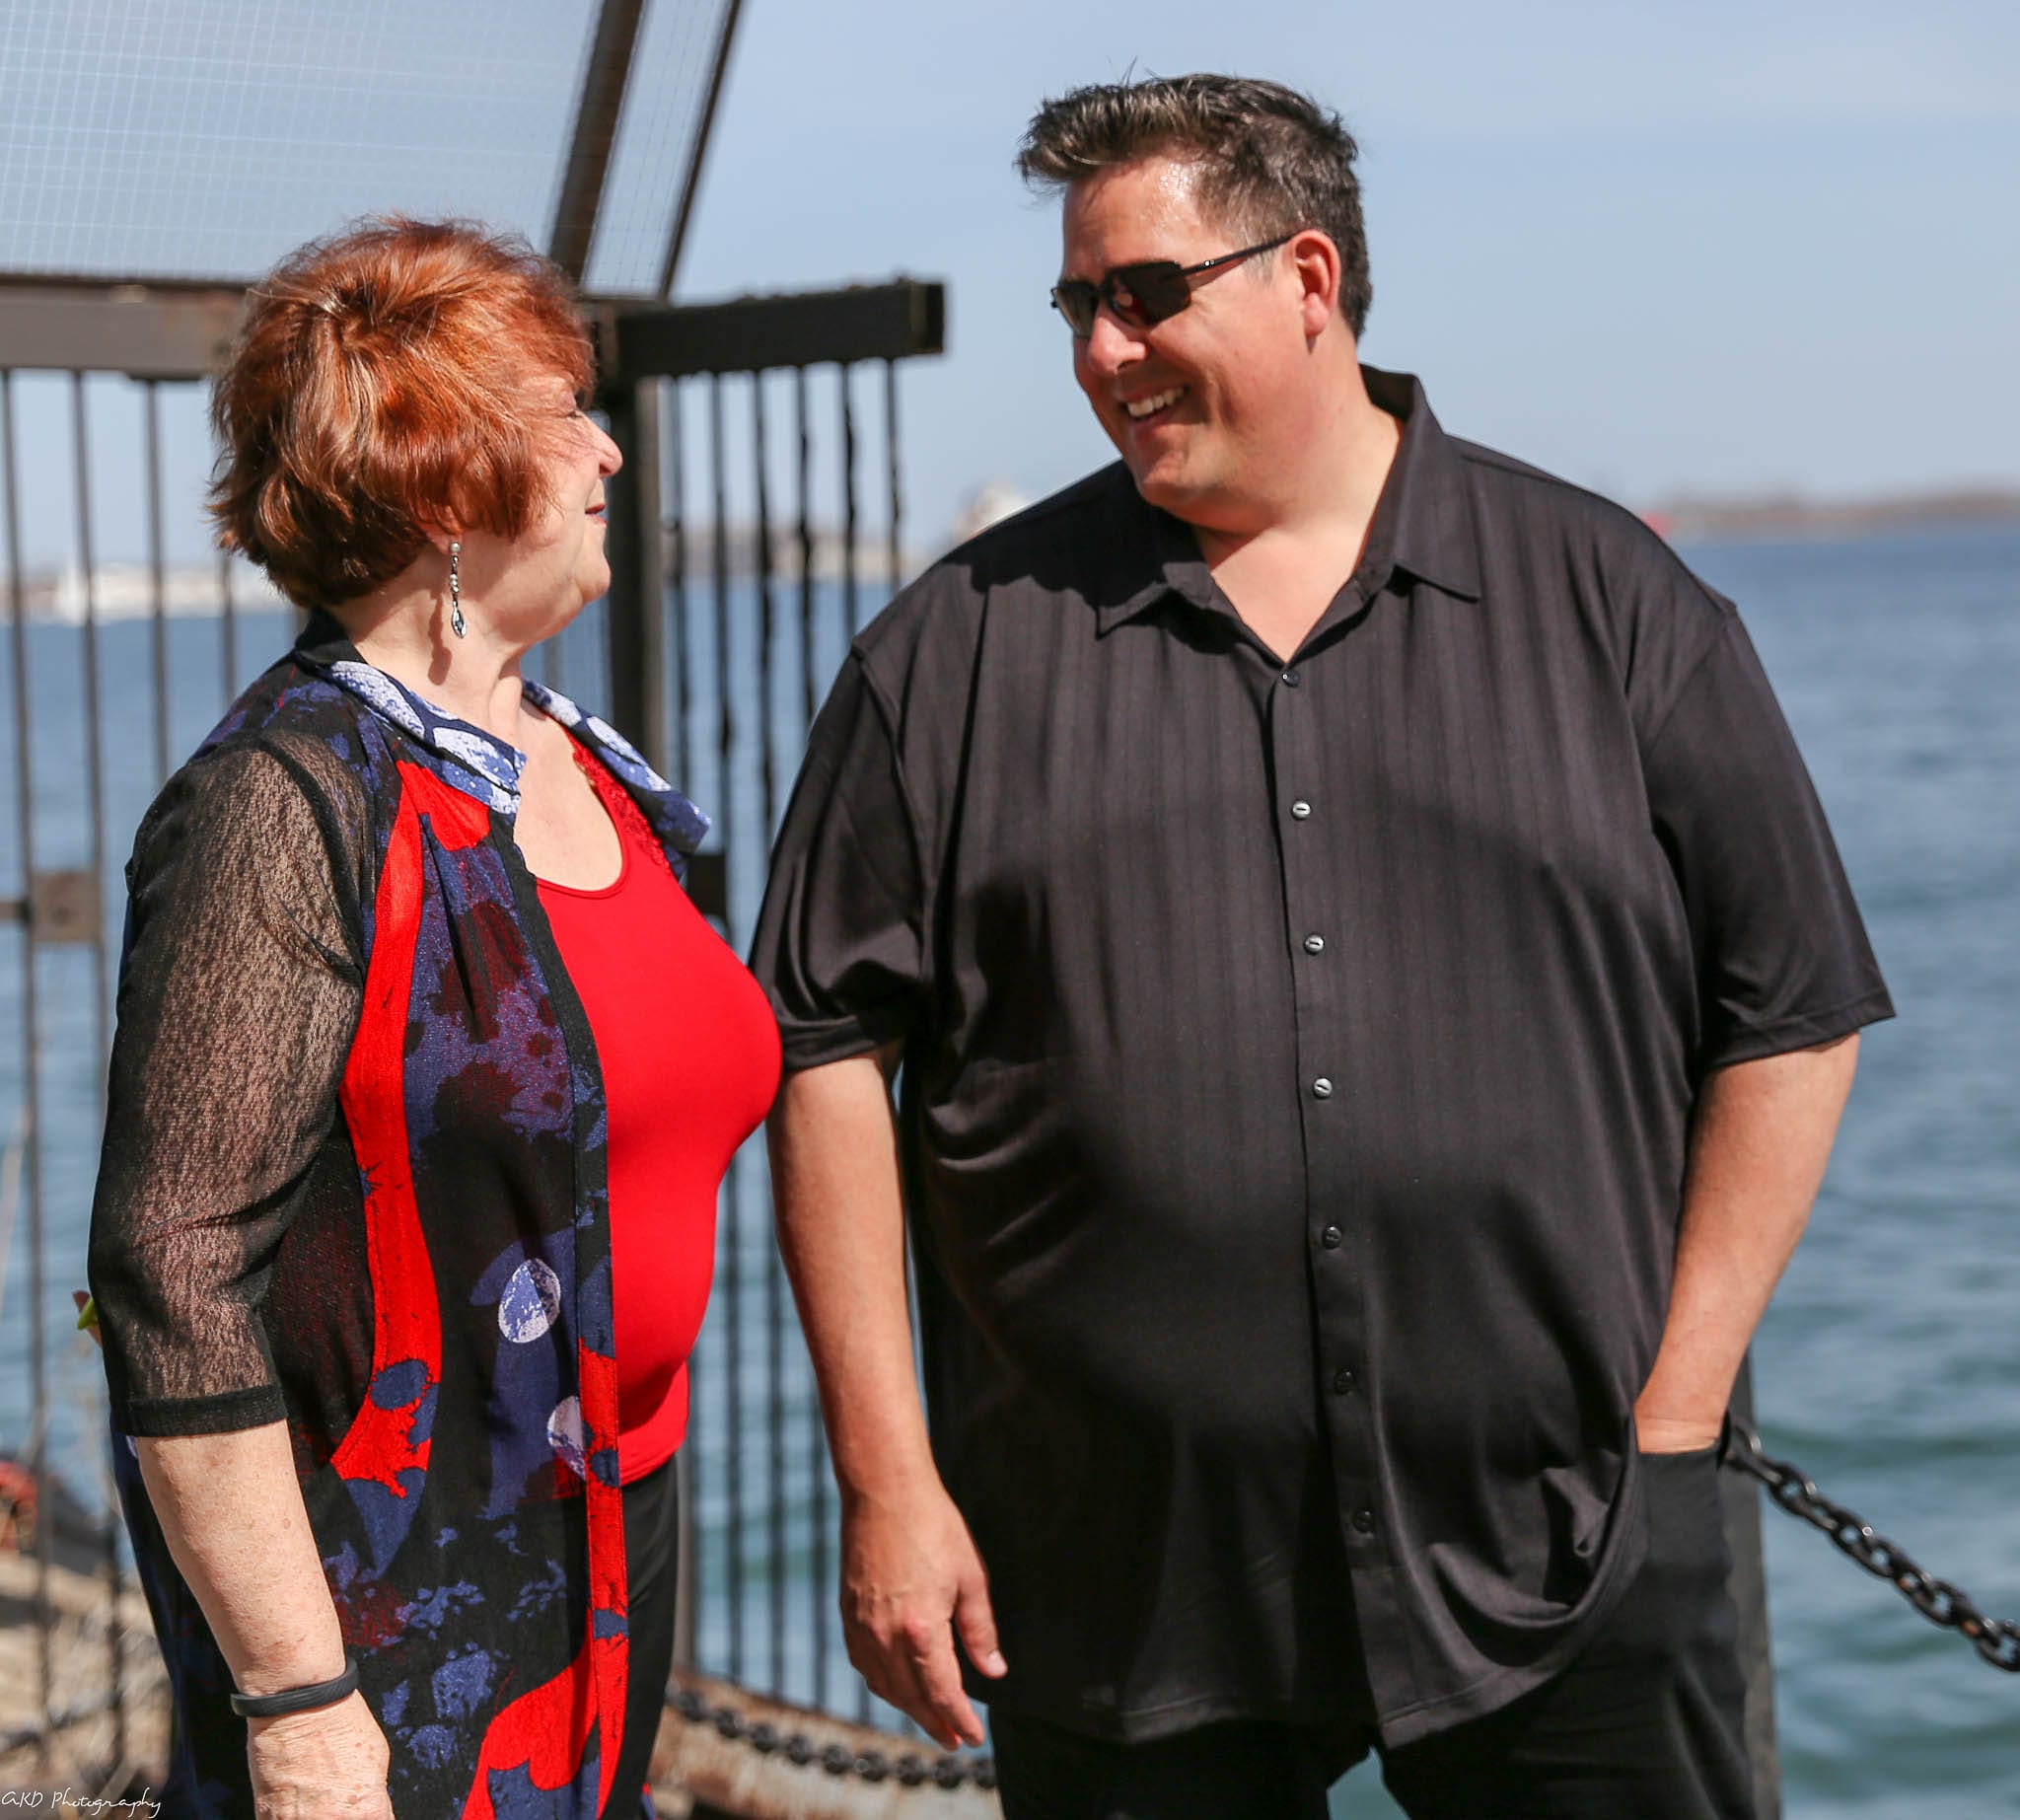 A man and a woman, both smiling and looking at each other, standing by a waterfront with a barrier and the sea in the background. the woman is dressed in a red and blue dress, and the man in a black shirt.